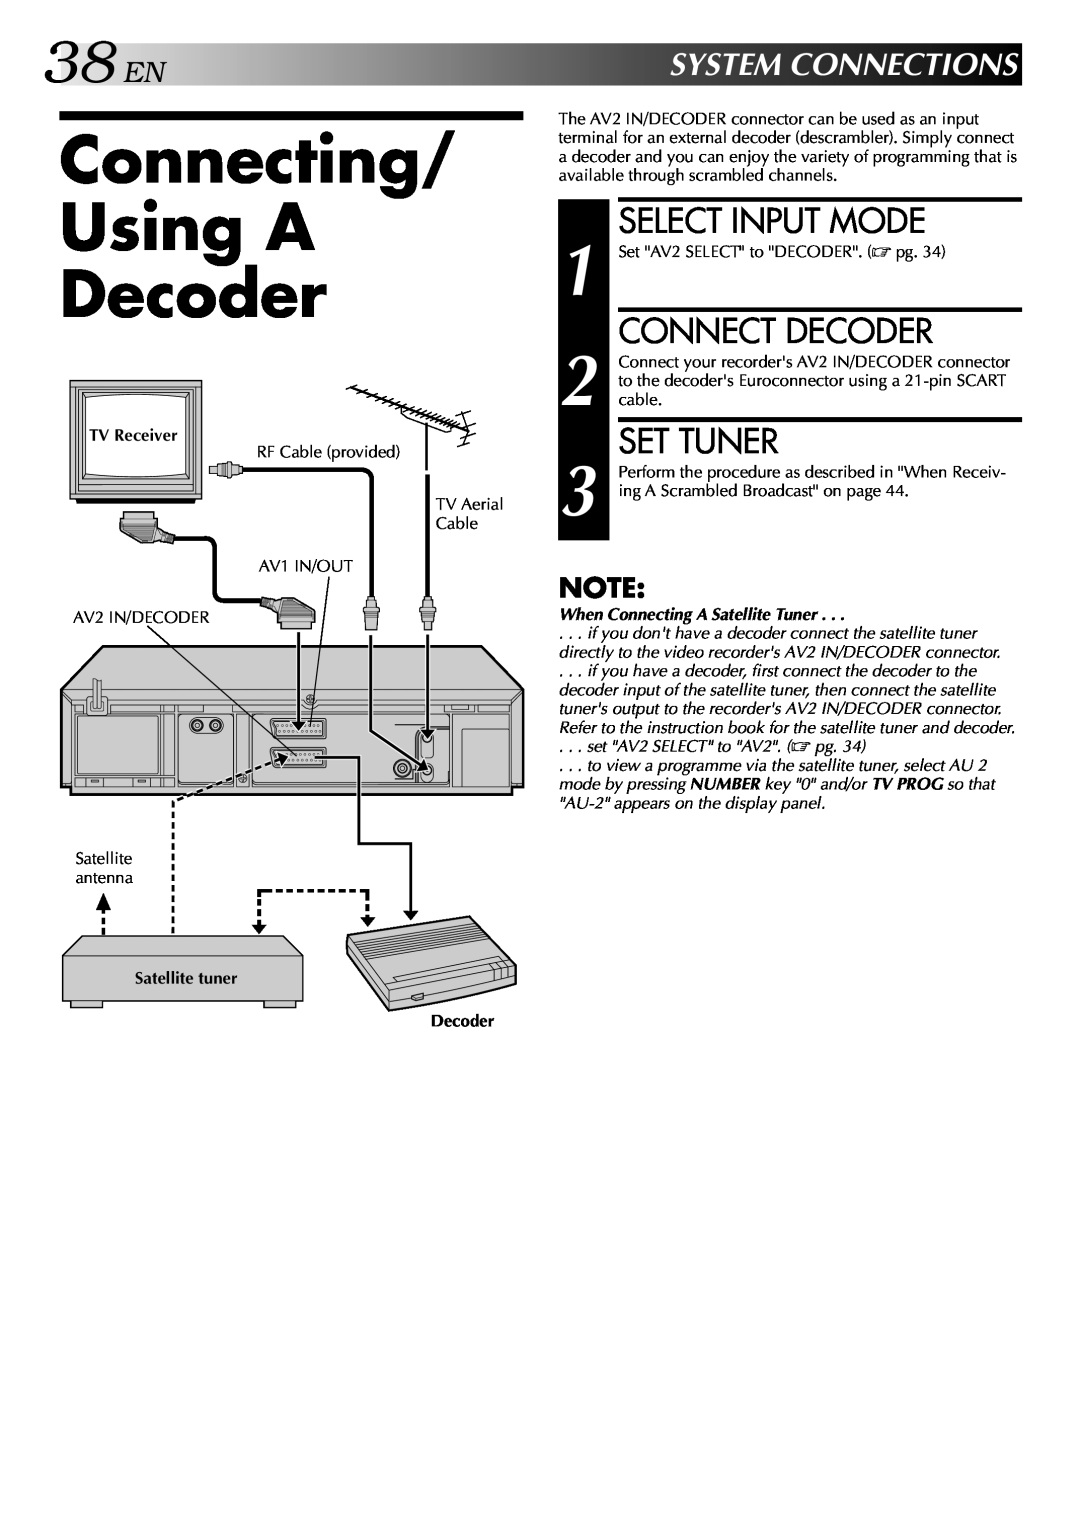 JVC HR-DD848E Connecting Using A Decoder, Select Input Mode, Connect Decoder, Set Tuner, 38ENSYSTEMCONNECTIONS 